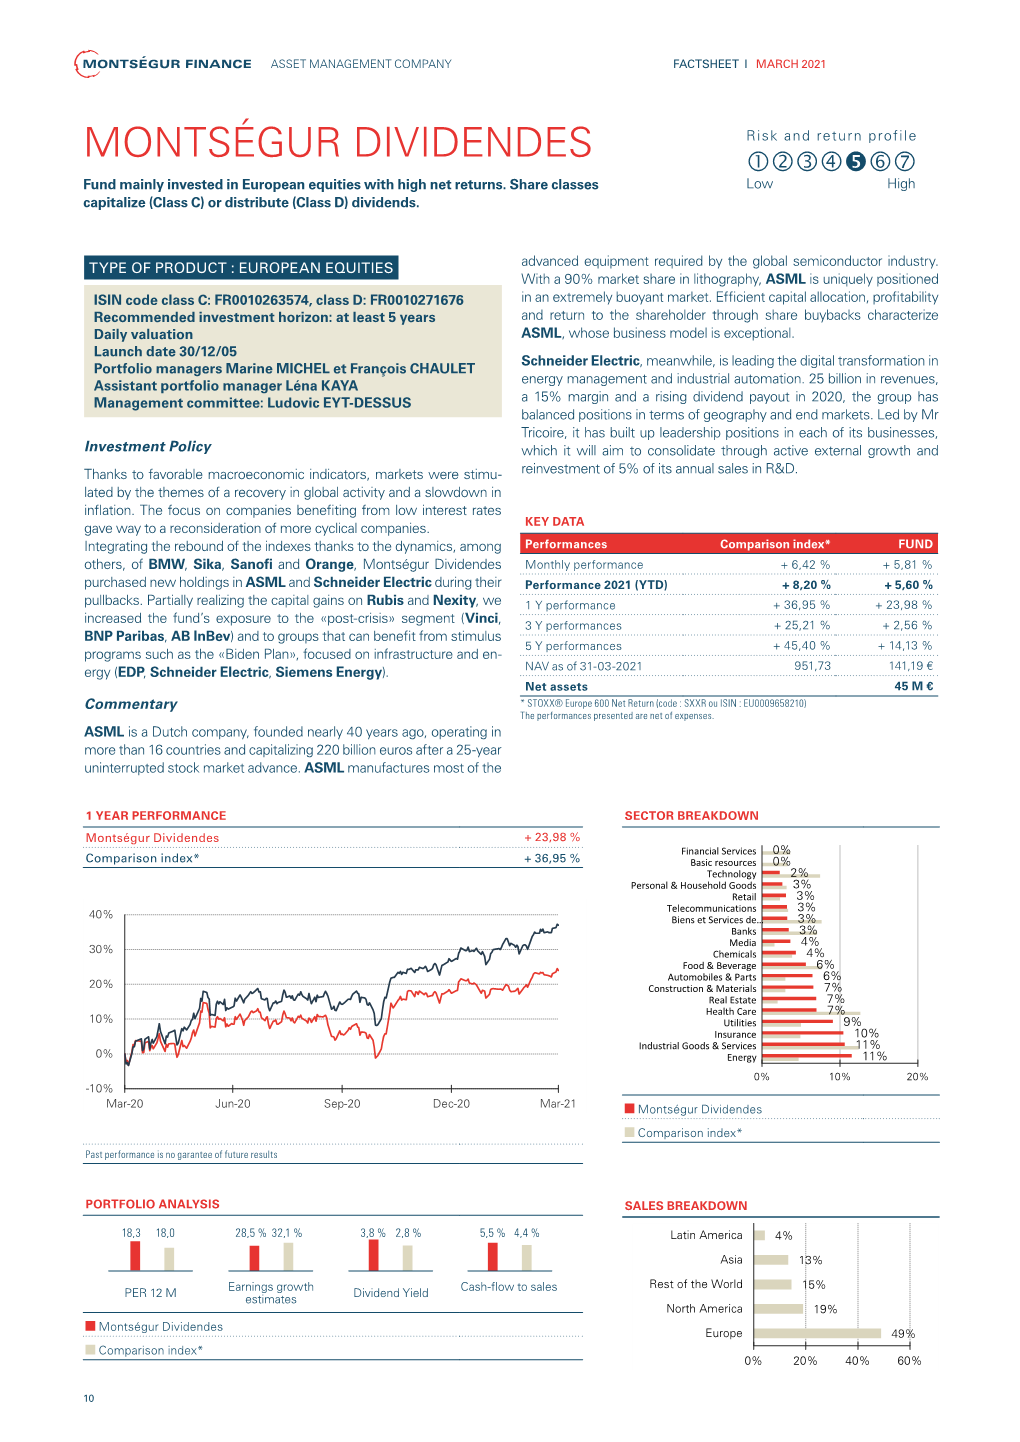 MONTSÉGUR DIVIDENDES  Fund Mainly Invested in European Equities with High Net Returns